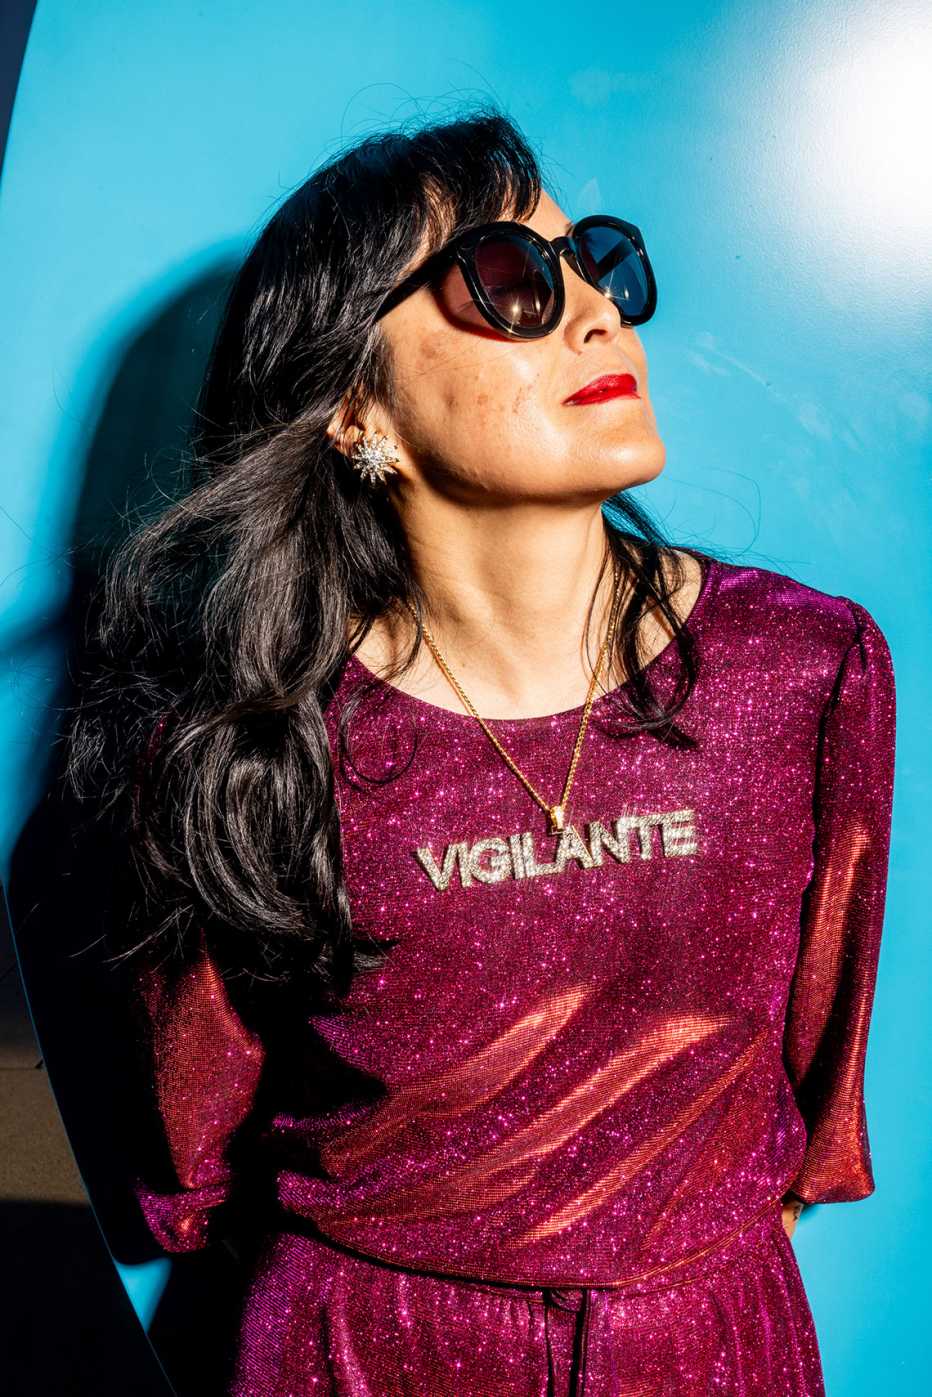 jenny ho wearing a sparkly jumpsuit and a rhinestone necklace that says vigilante